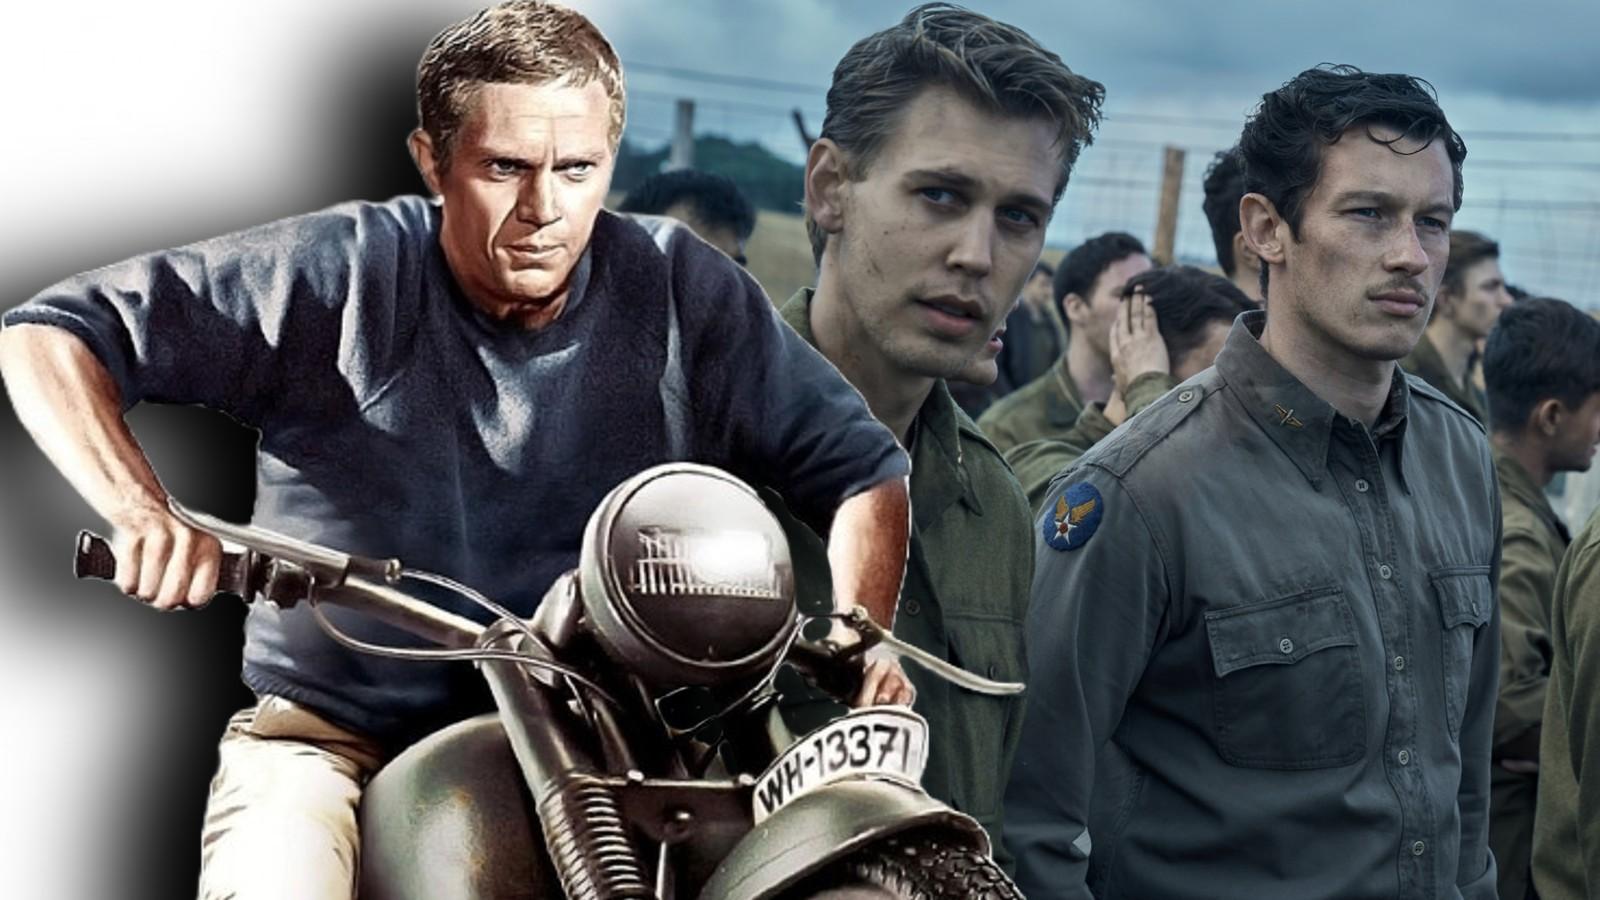 Steve McQueen in The Great Escape and the cast of Masters of the Air